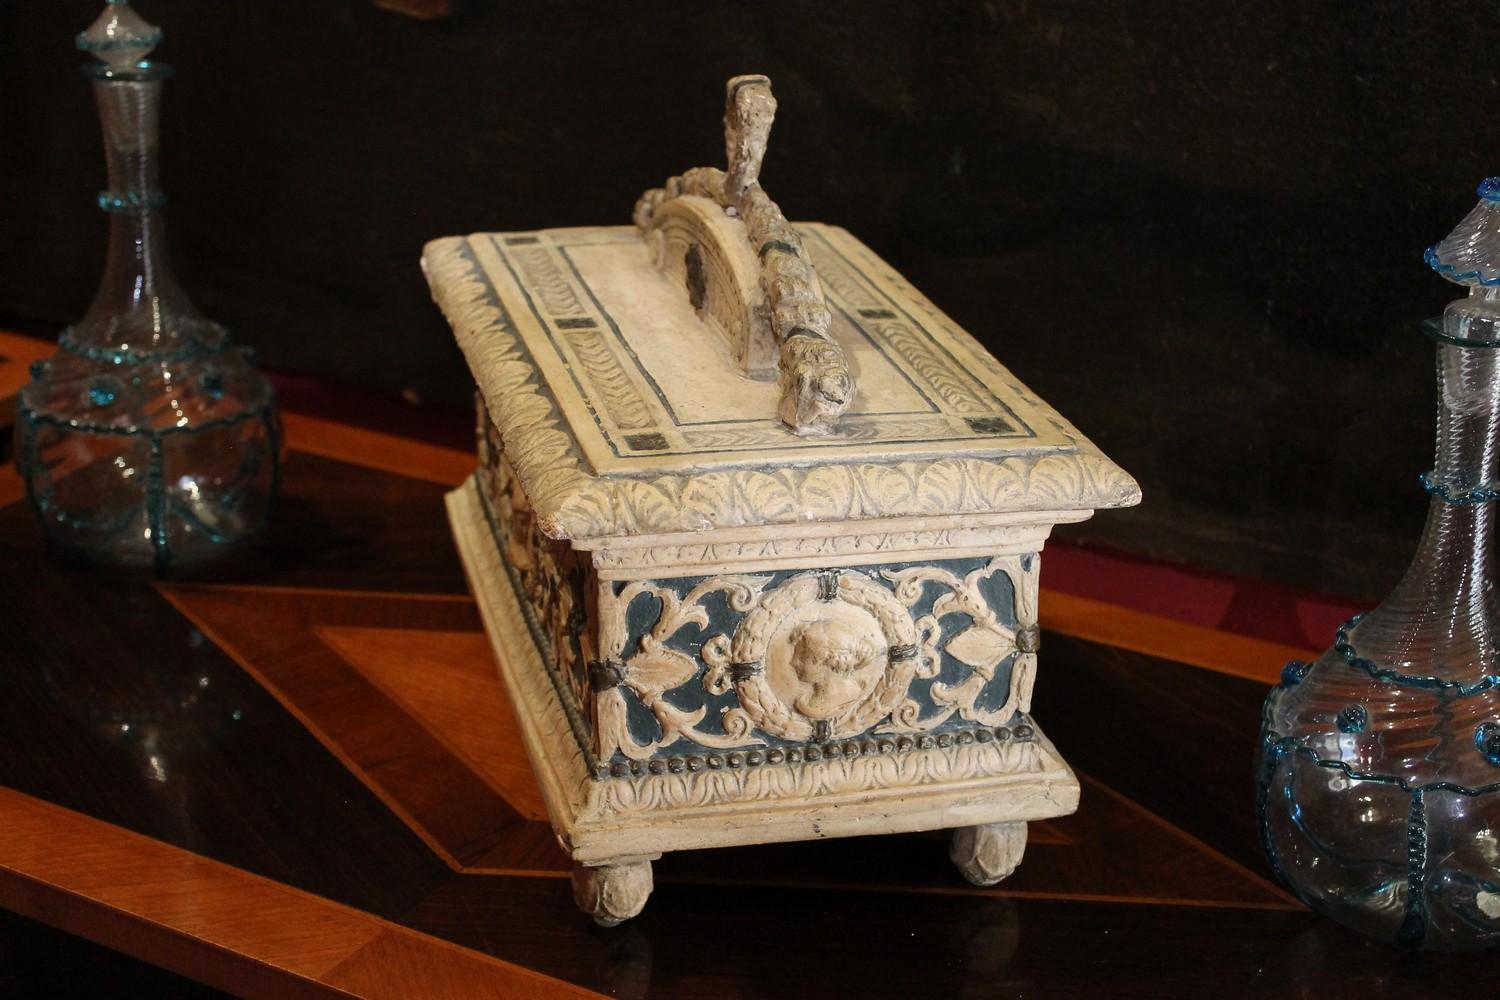 Italian 19th Century Renaissance Style Wood Lacquer and Painted Gesso Lidded Box For Sale 1